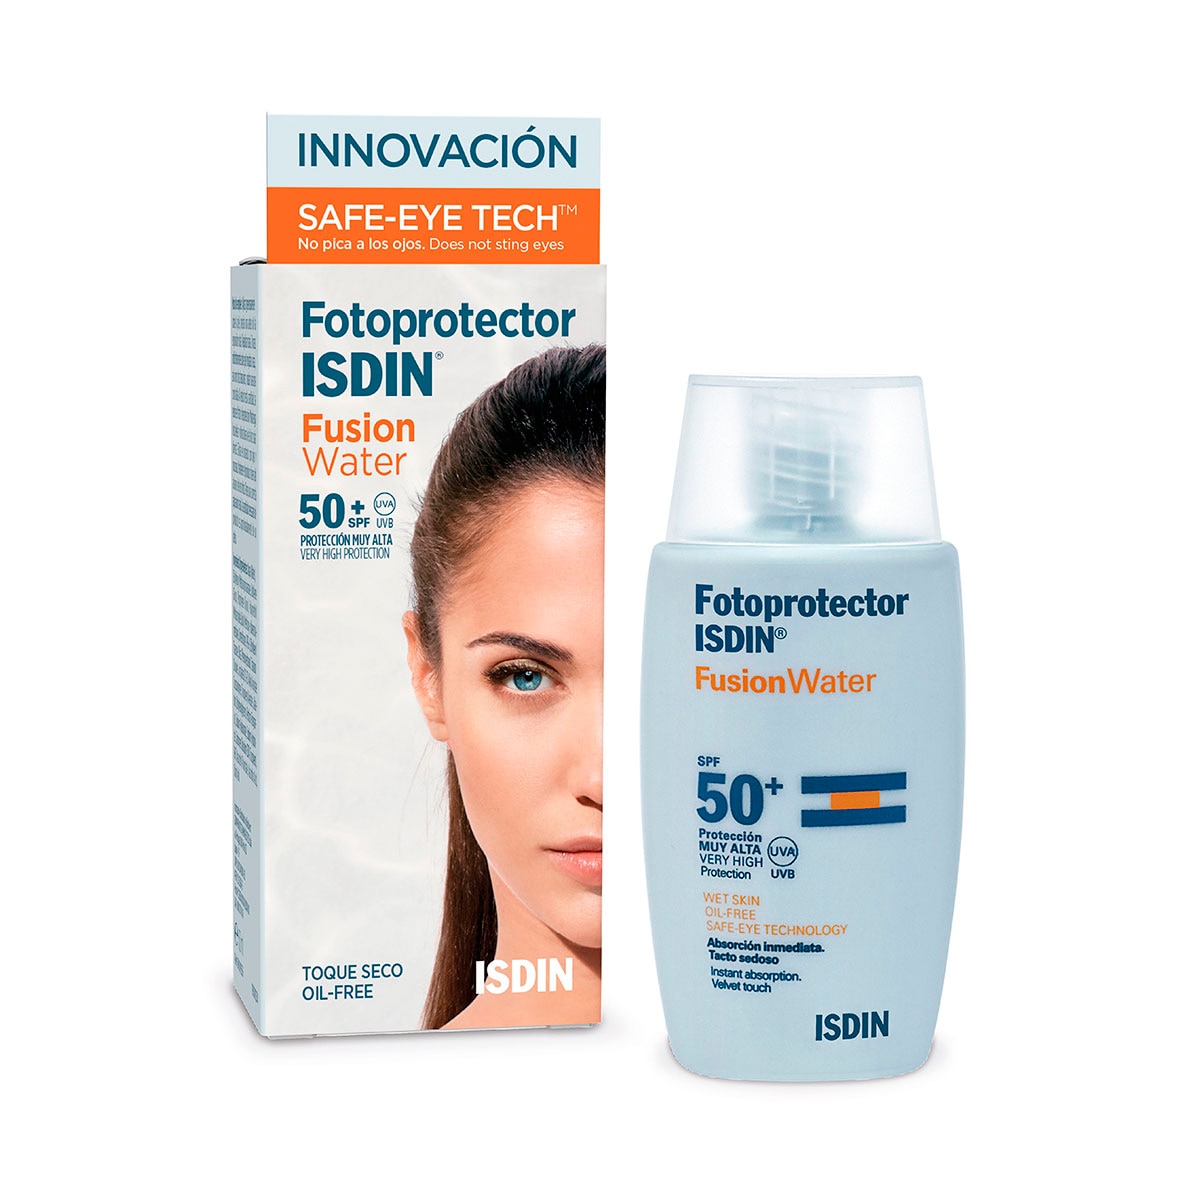 Fotoprotector ISDIN Fusion Water SPF 50+ 50 ml